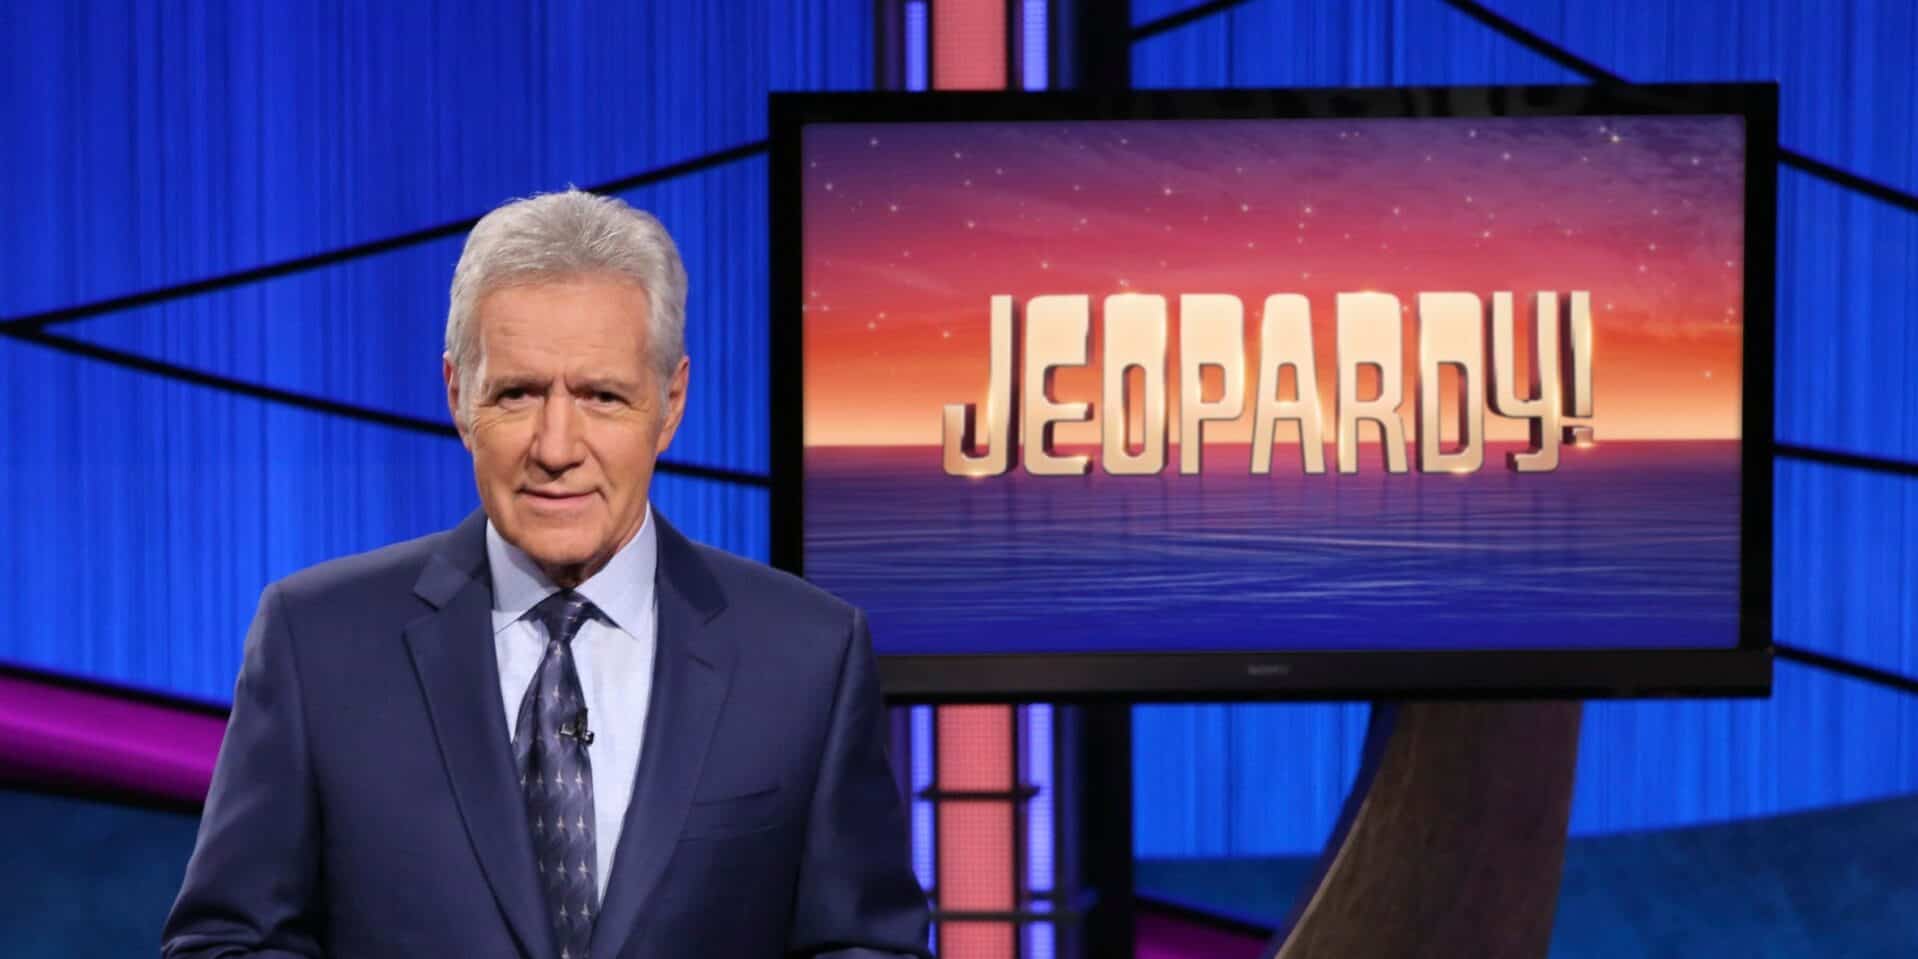 In November 2018, Alex Trebek extended his contract as "Jeopardy!" host until 2022